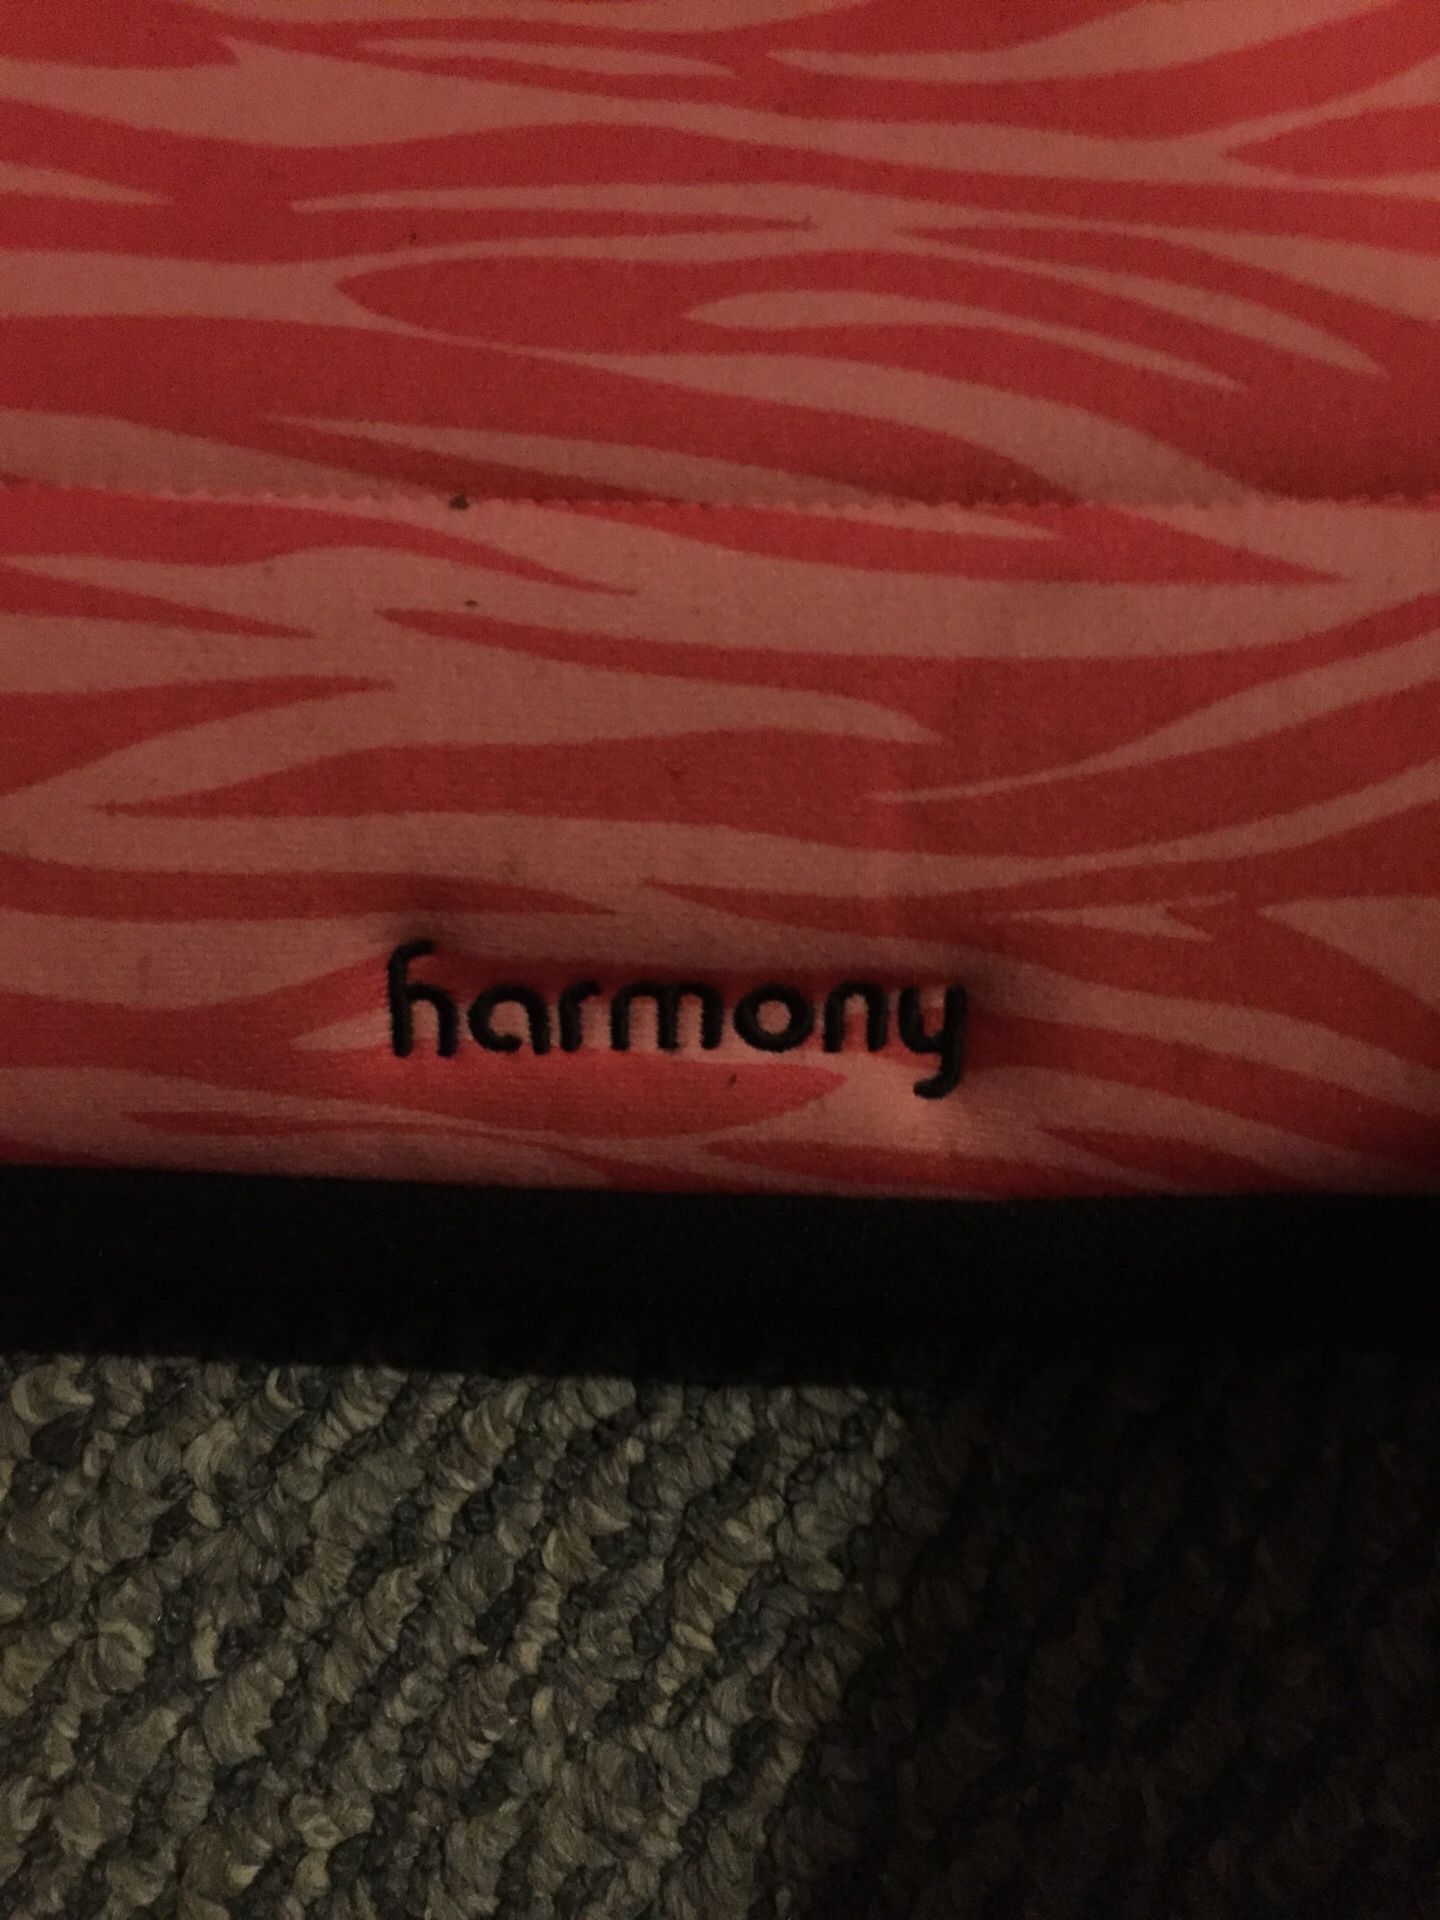 Harmony booster seat